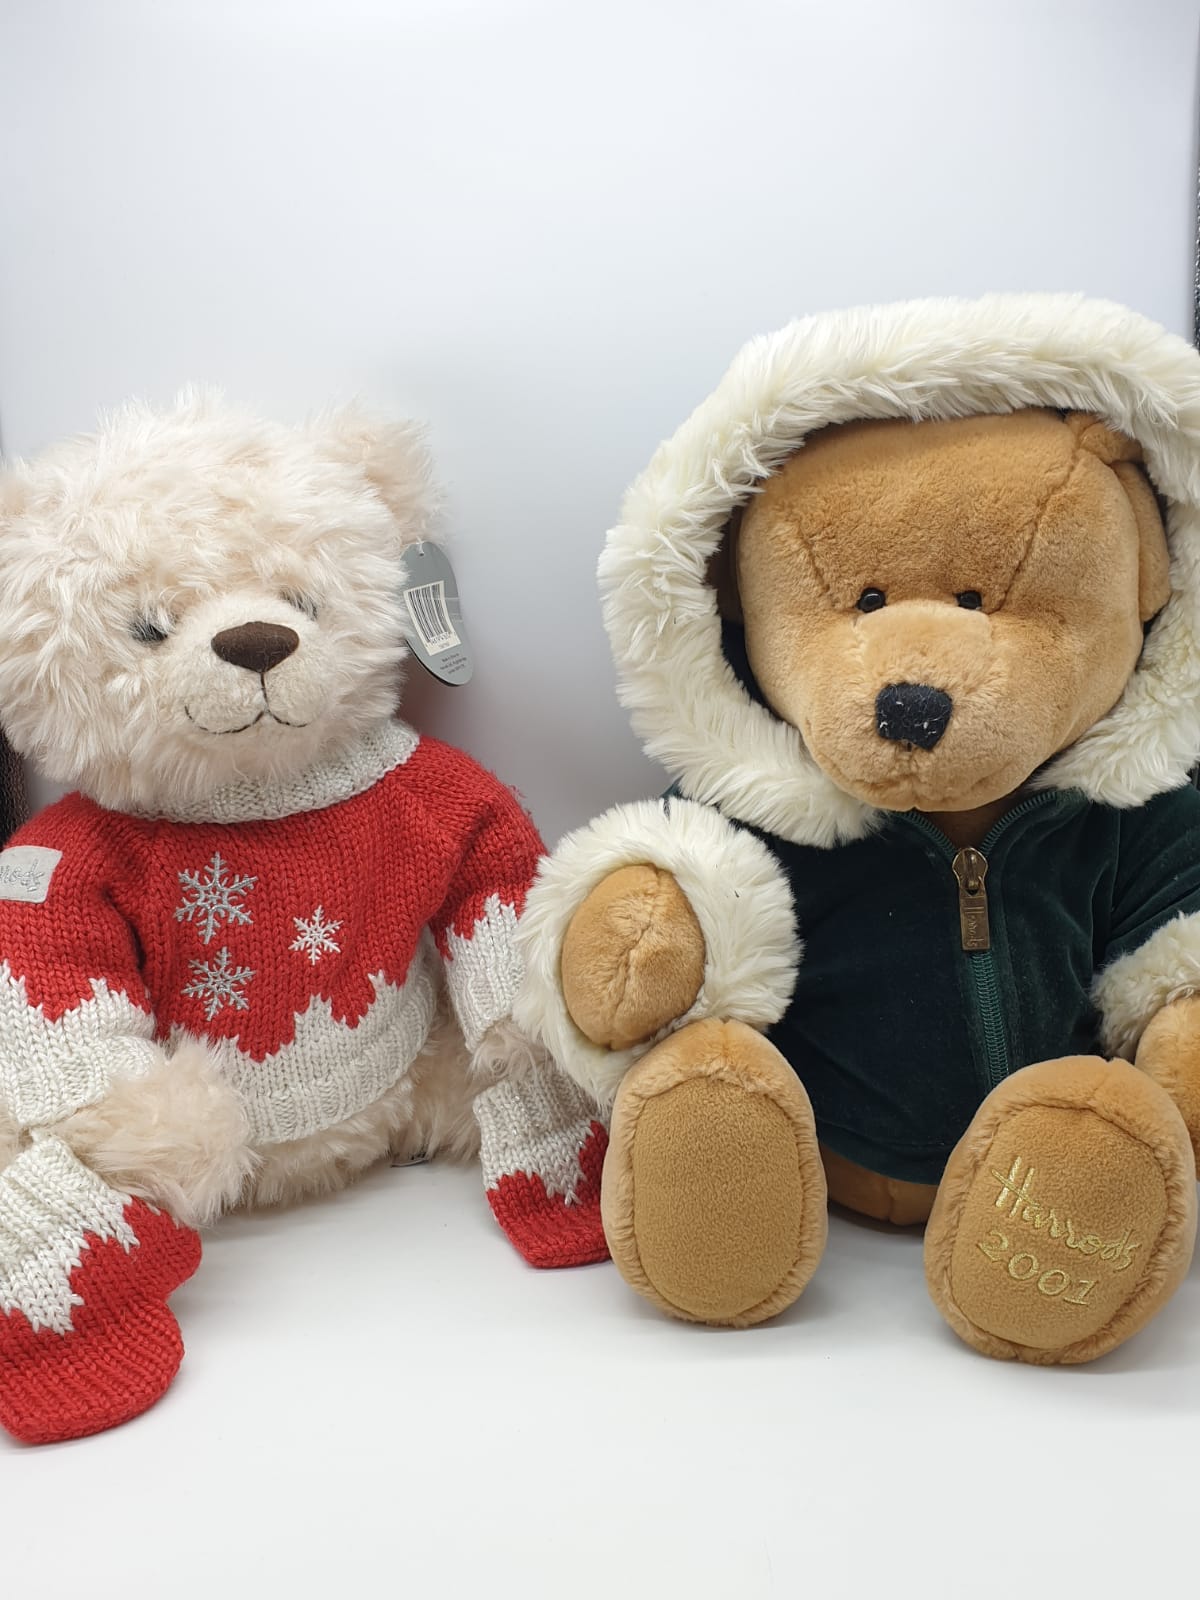 2 Harrods Teddy Bears 2001&2008 approx 40cms, very collectible